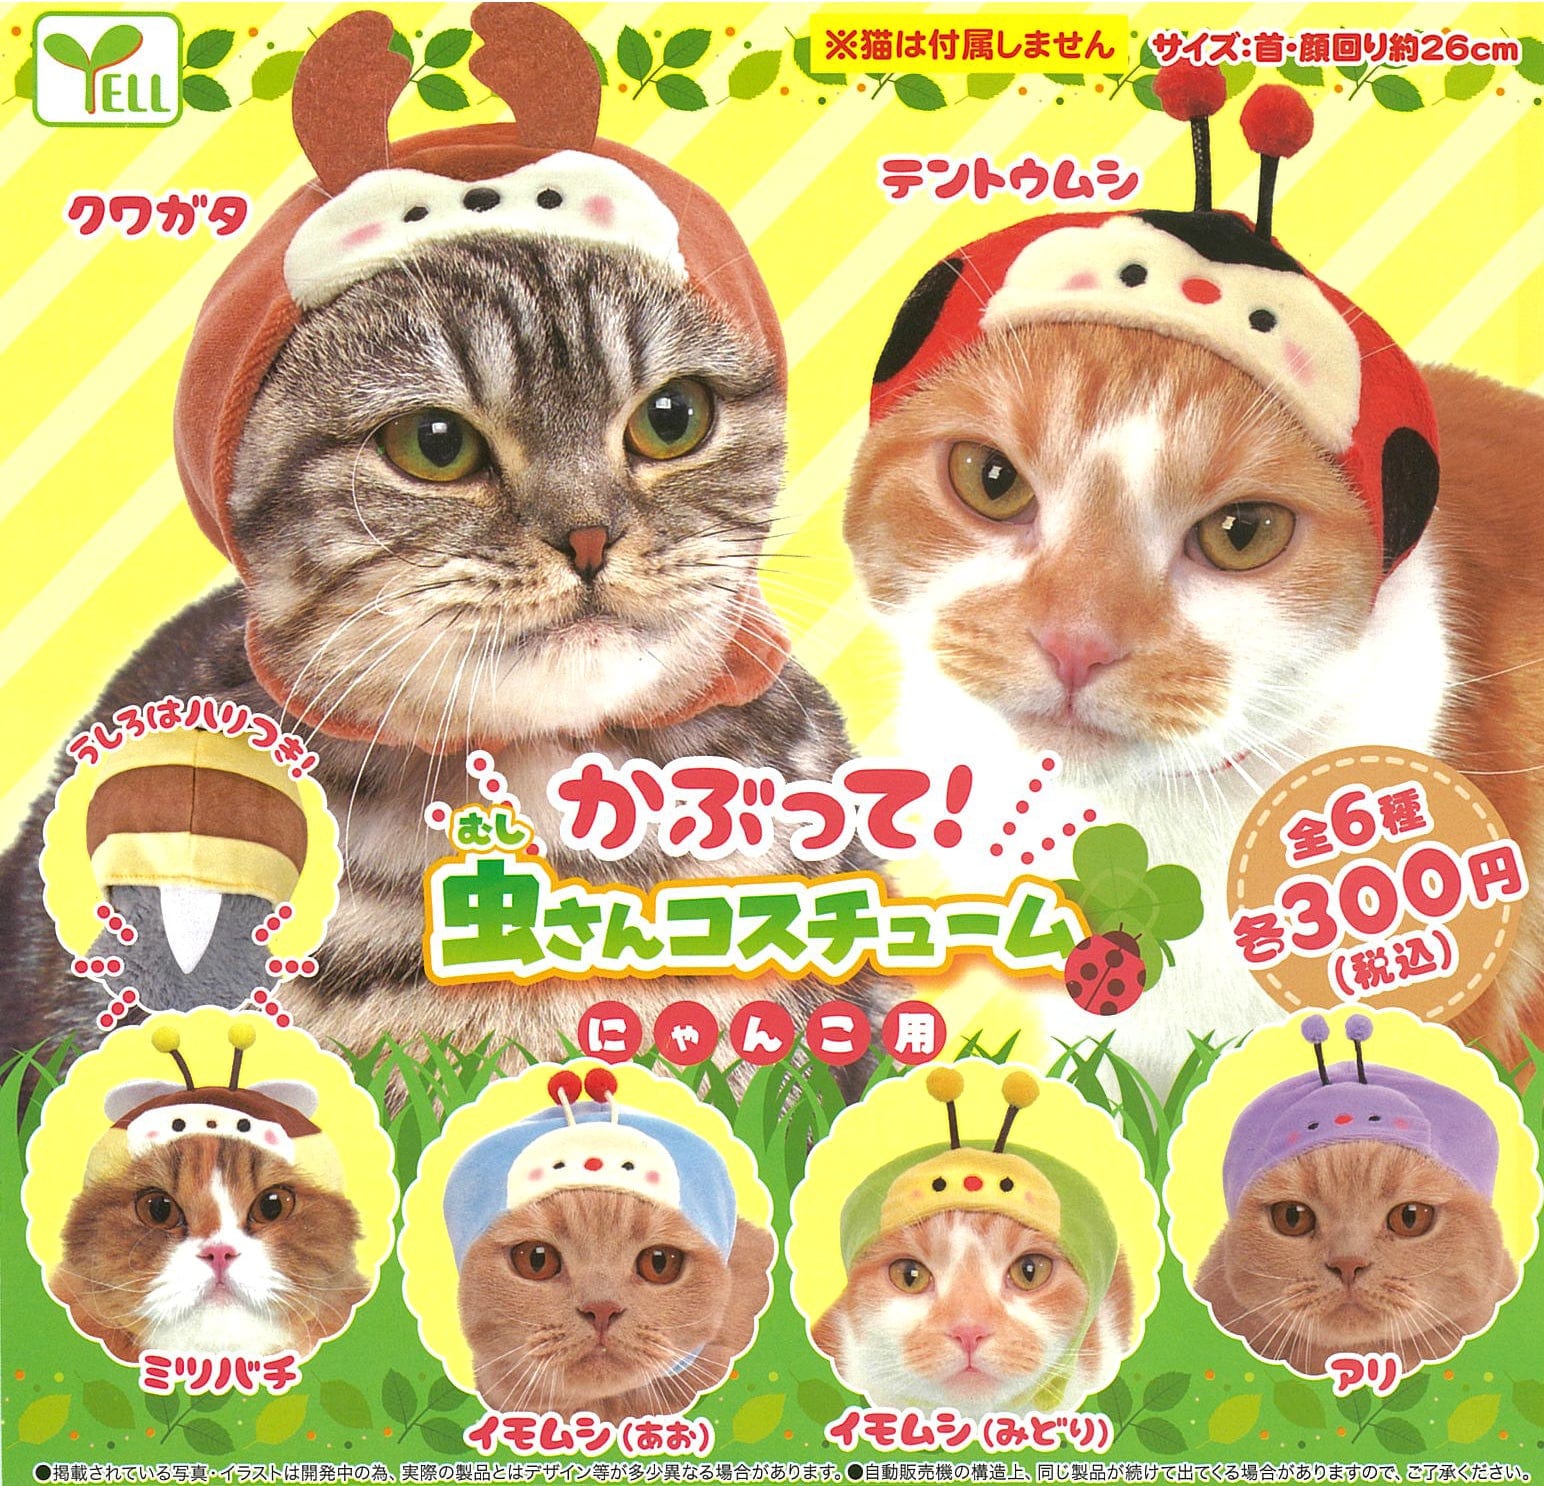 Yell CP0305 - Kabutte! Mushi-san Costume for Nyanko - Complete Set